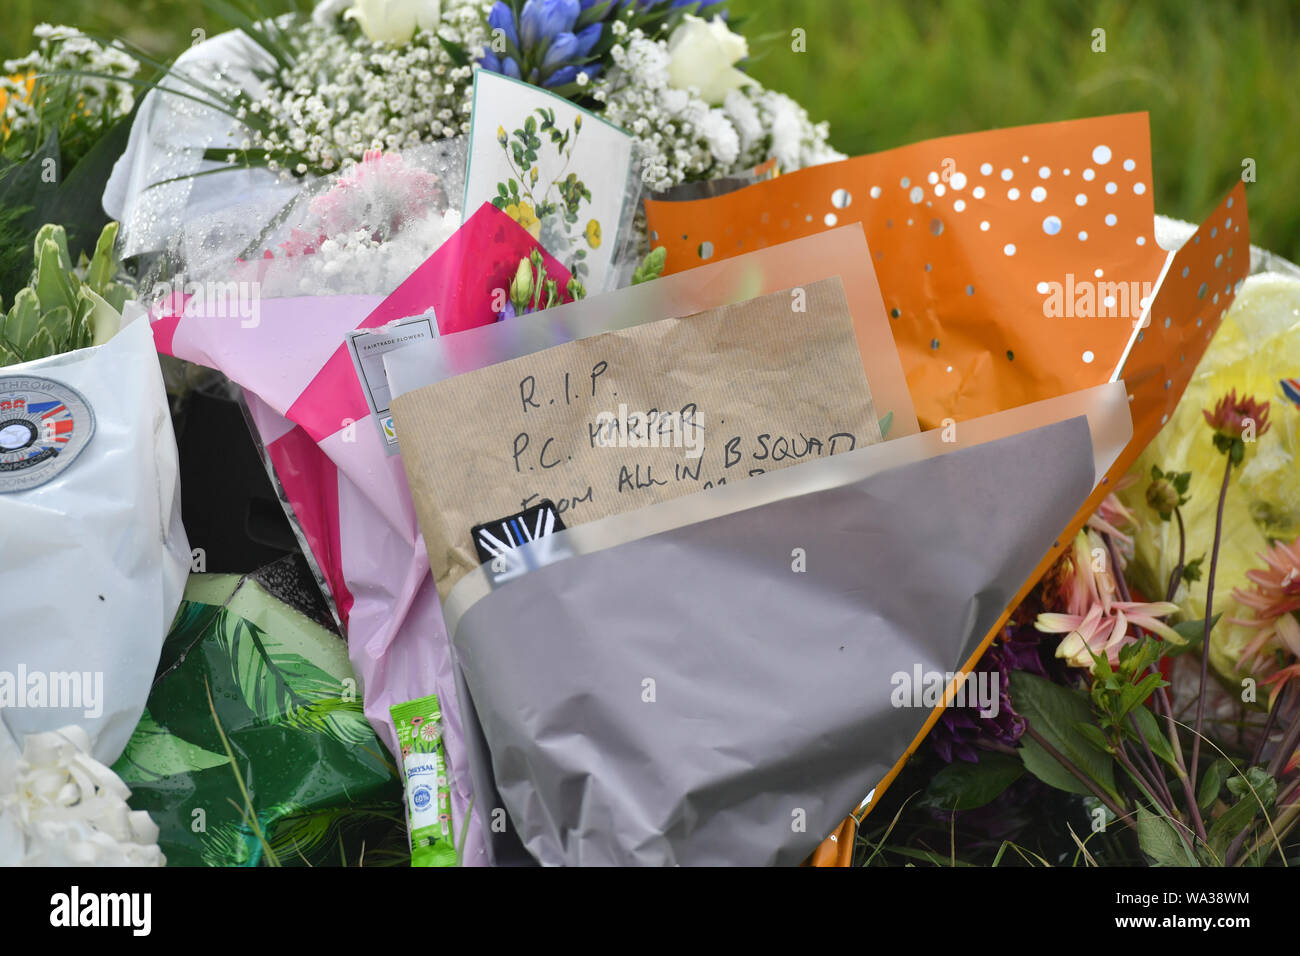 Messages on floral tributes at the scene, where Thames Valley Police officer Pc Andrew Harper, 28, died following a 'serious incident' at about 11.30pm on Thursday near the A4 Bath Road, between Reading and Newbury, at the village of Sulhamstead in Berkshire. Stock Photo